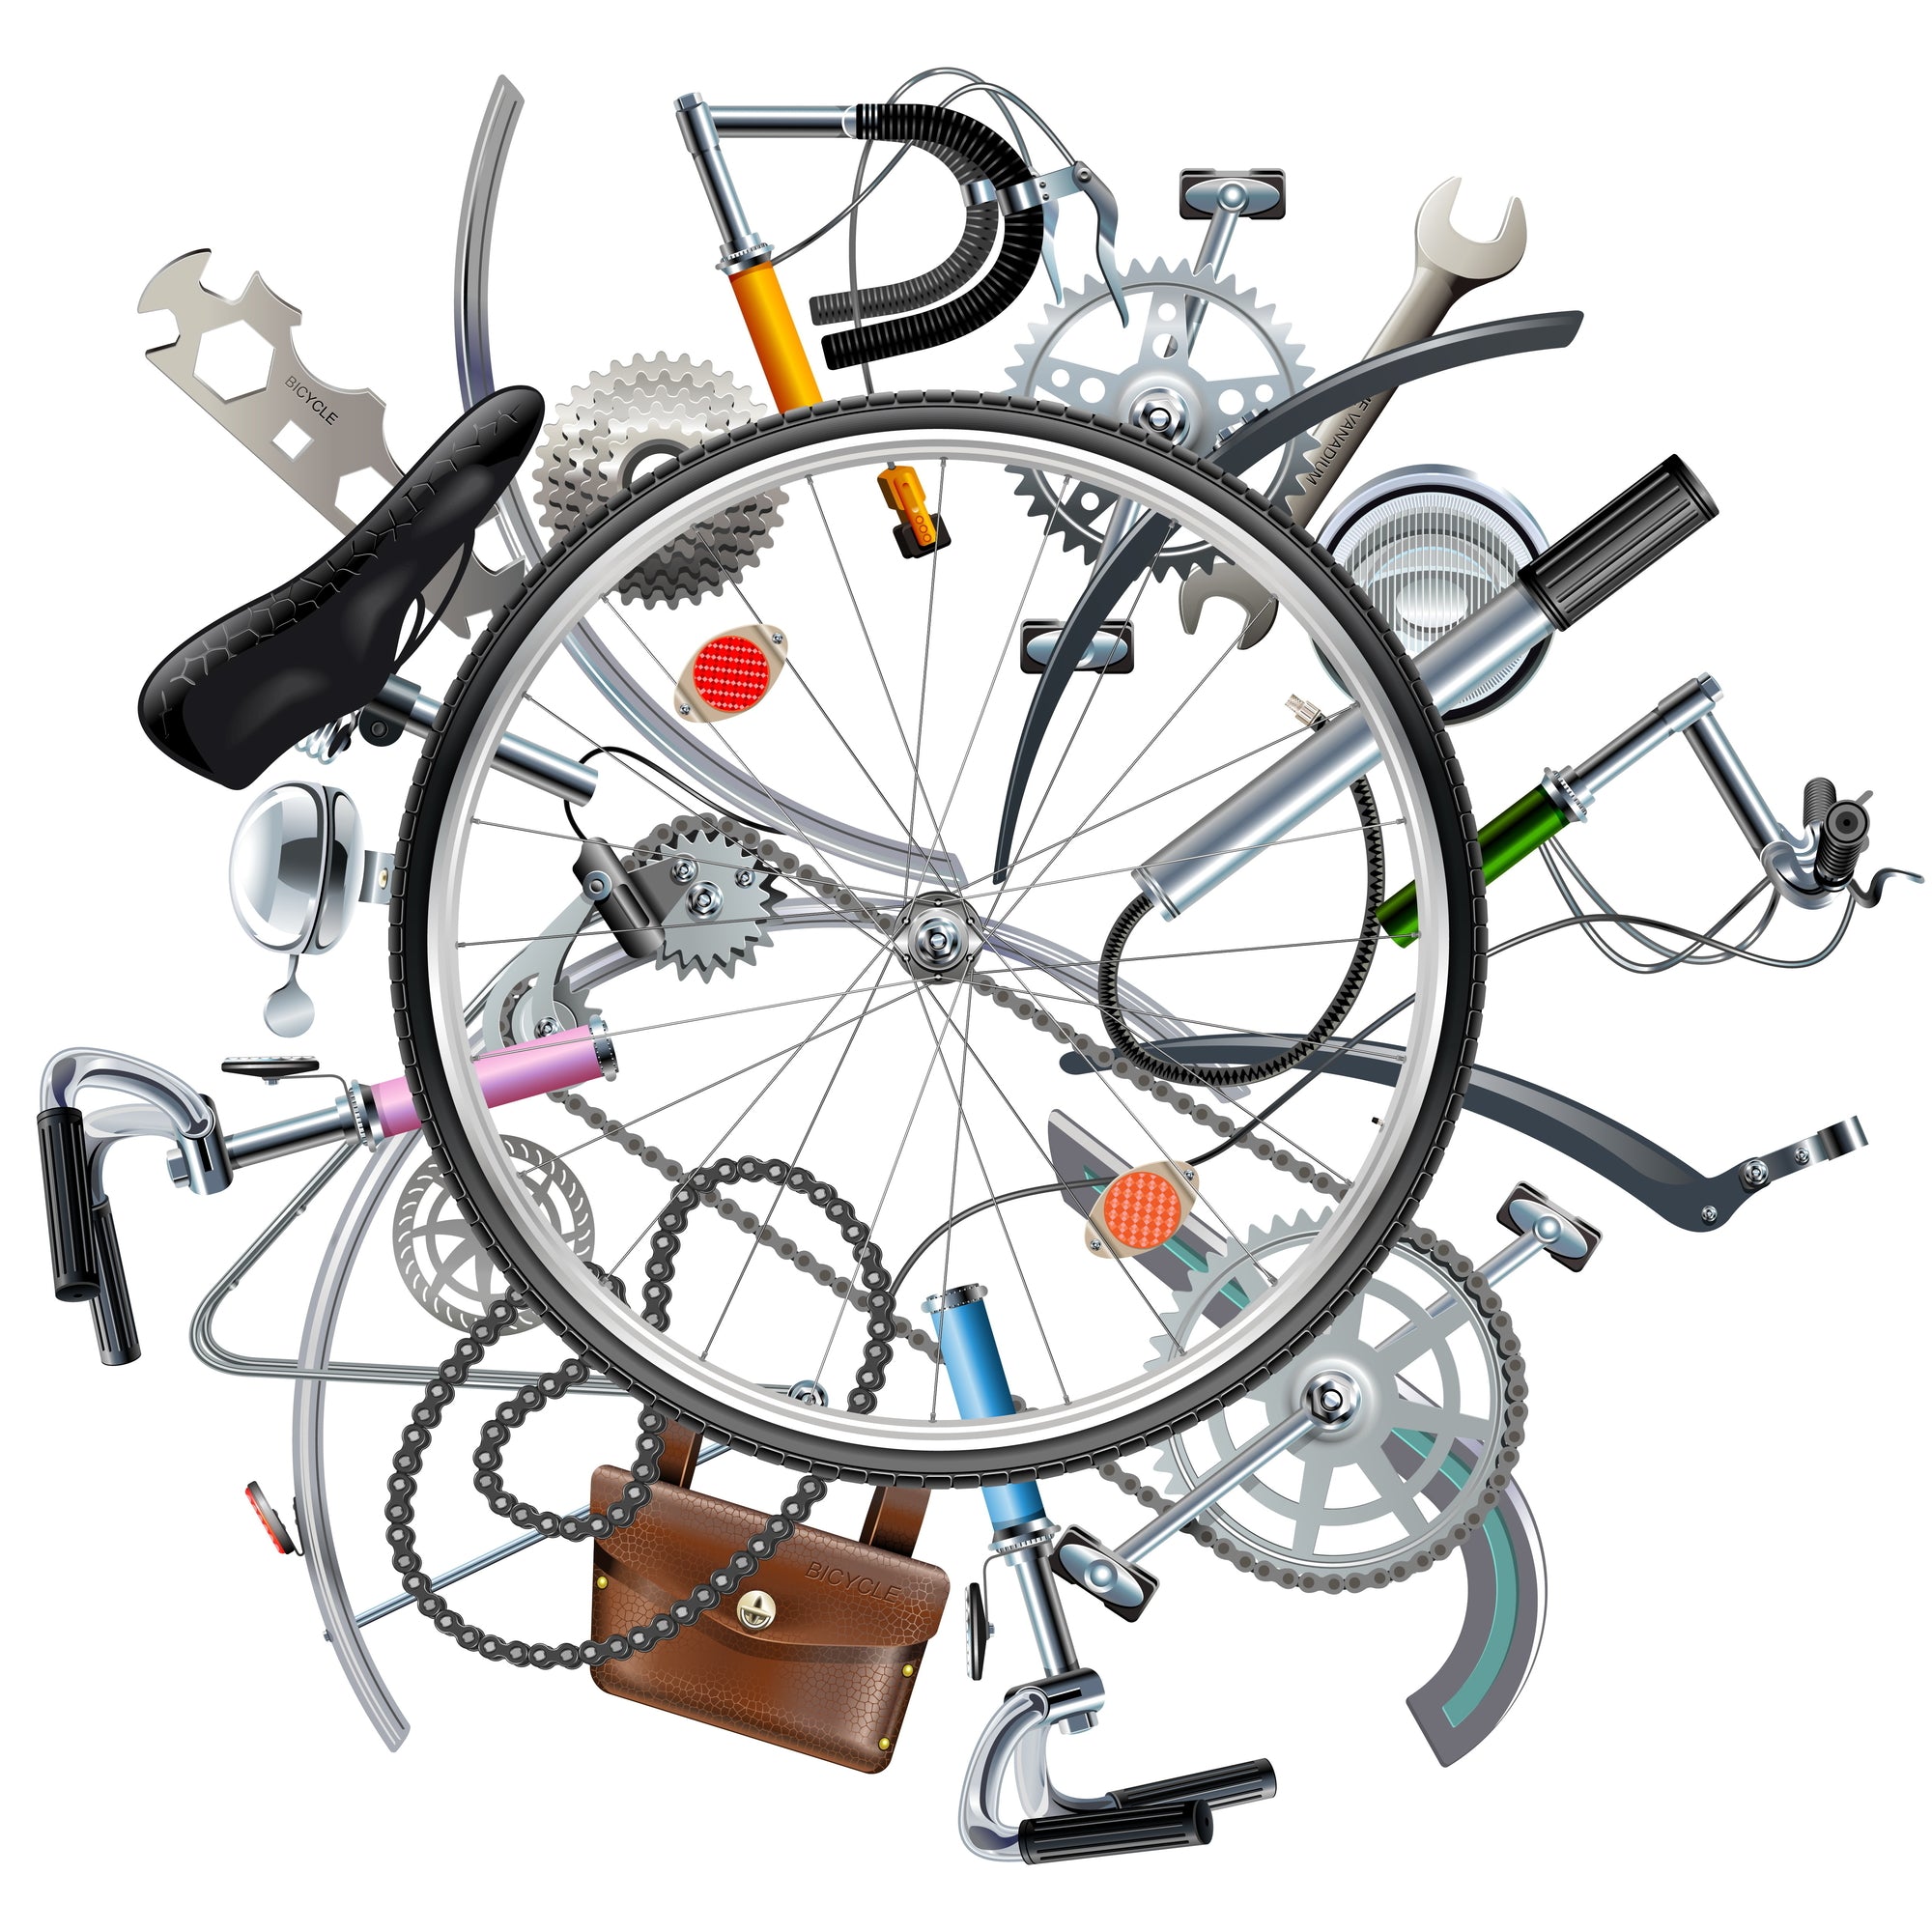 Anatomy Of A Bicycle